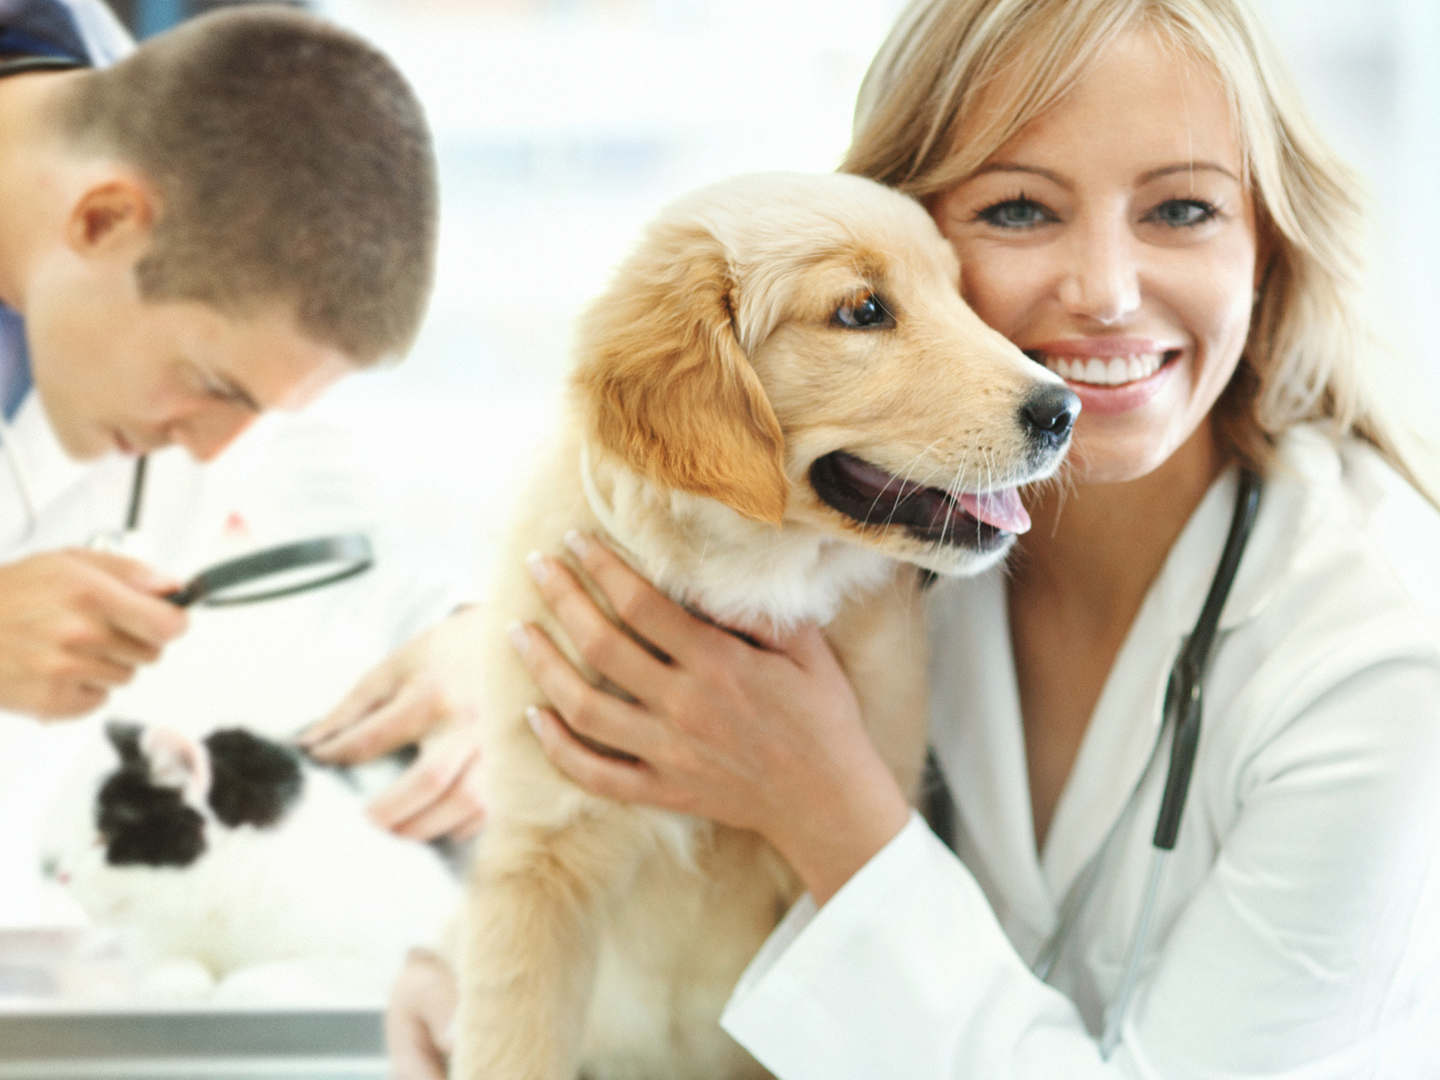 Closeup of vet&#039;s doing their job at animal hospital. Female vet in mid 30&#039;s is holding cute golden retriever puppy, smiling and looking at camera. Her colleague in background is examining a cat, slightly blurry.